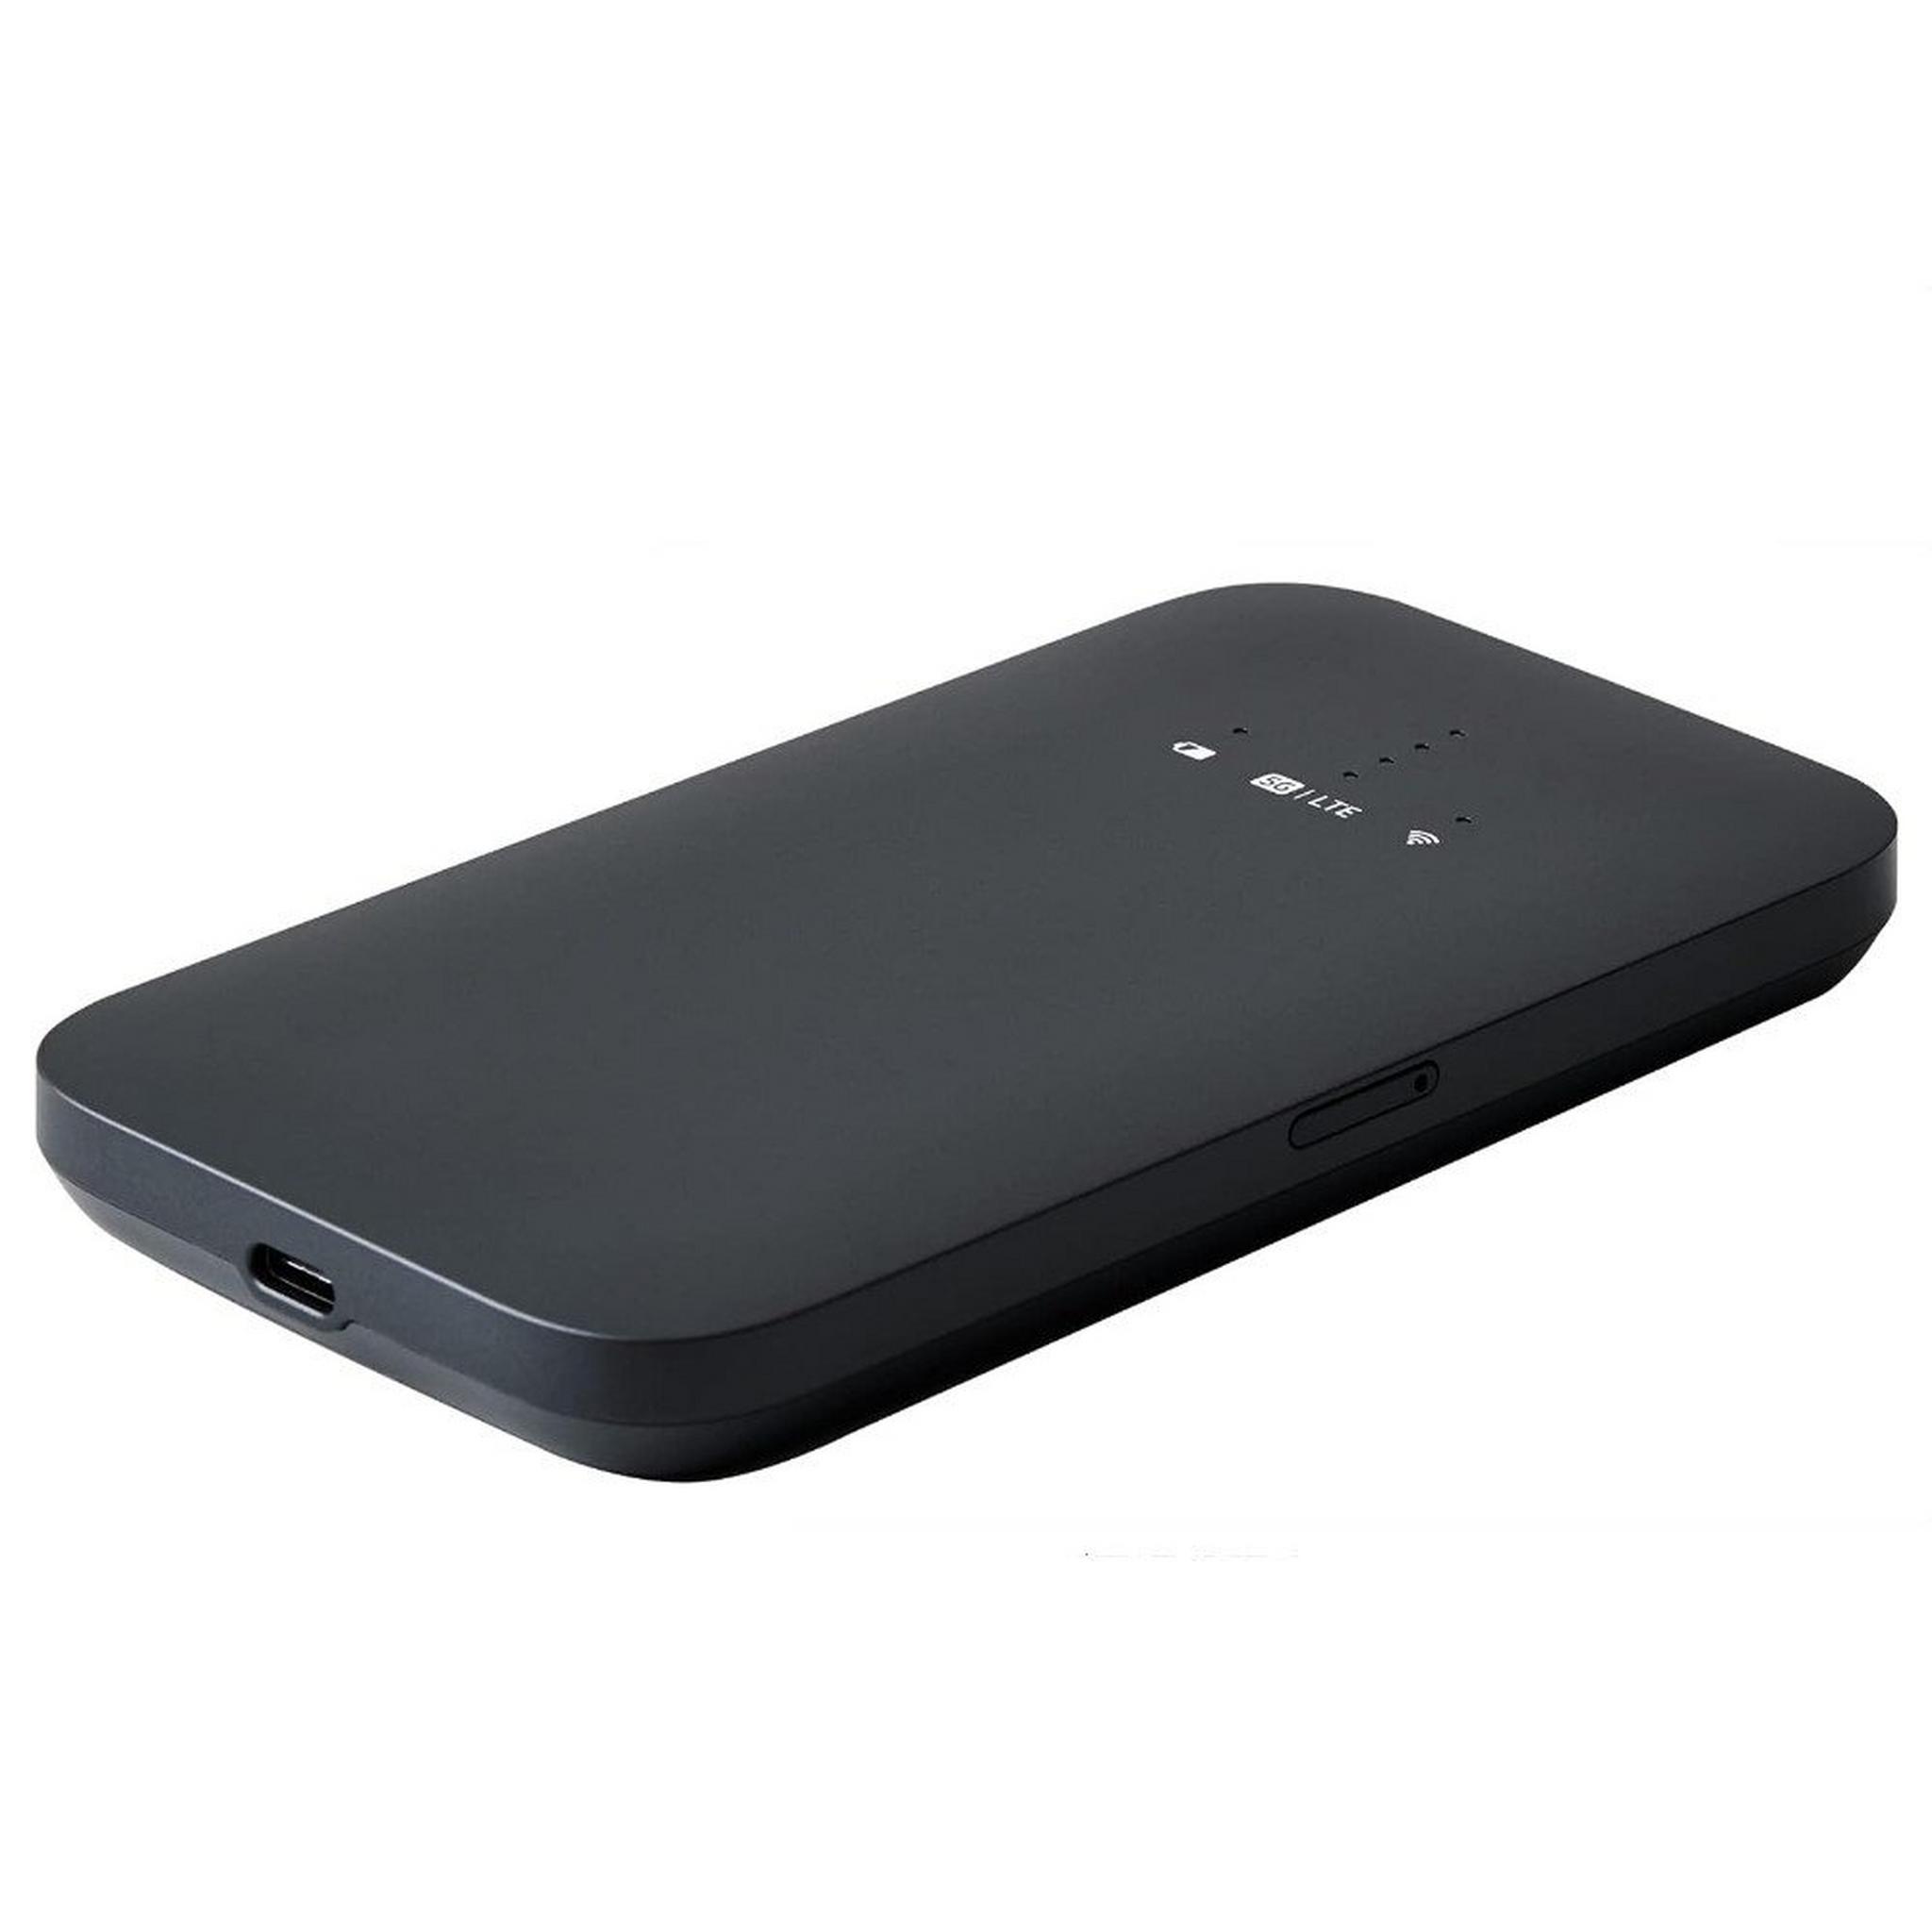 Linksys 5G Mobile Portable Router, Speeds up to 1.8Gbps, FGHSAX1800-ME - Black